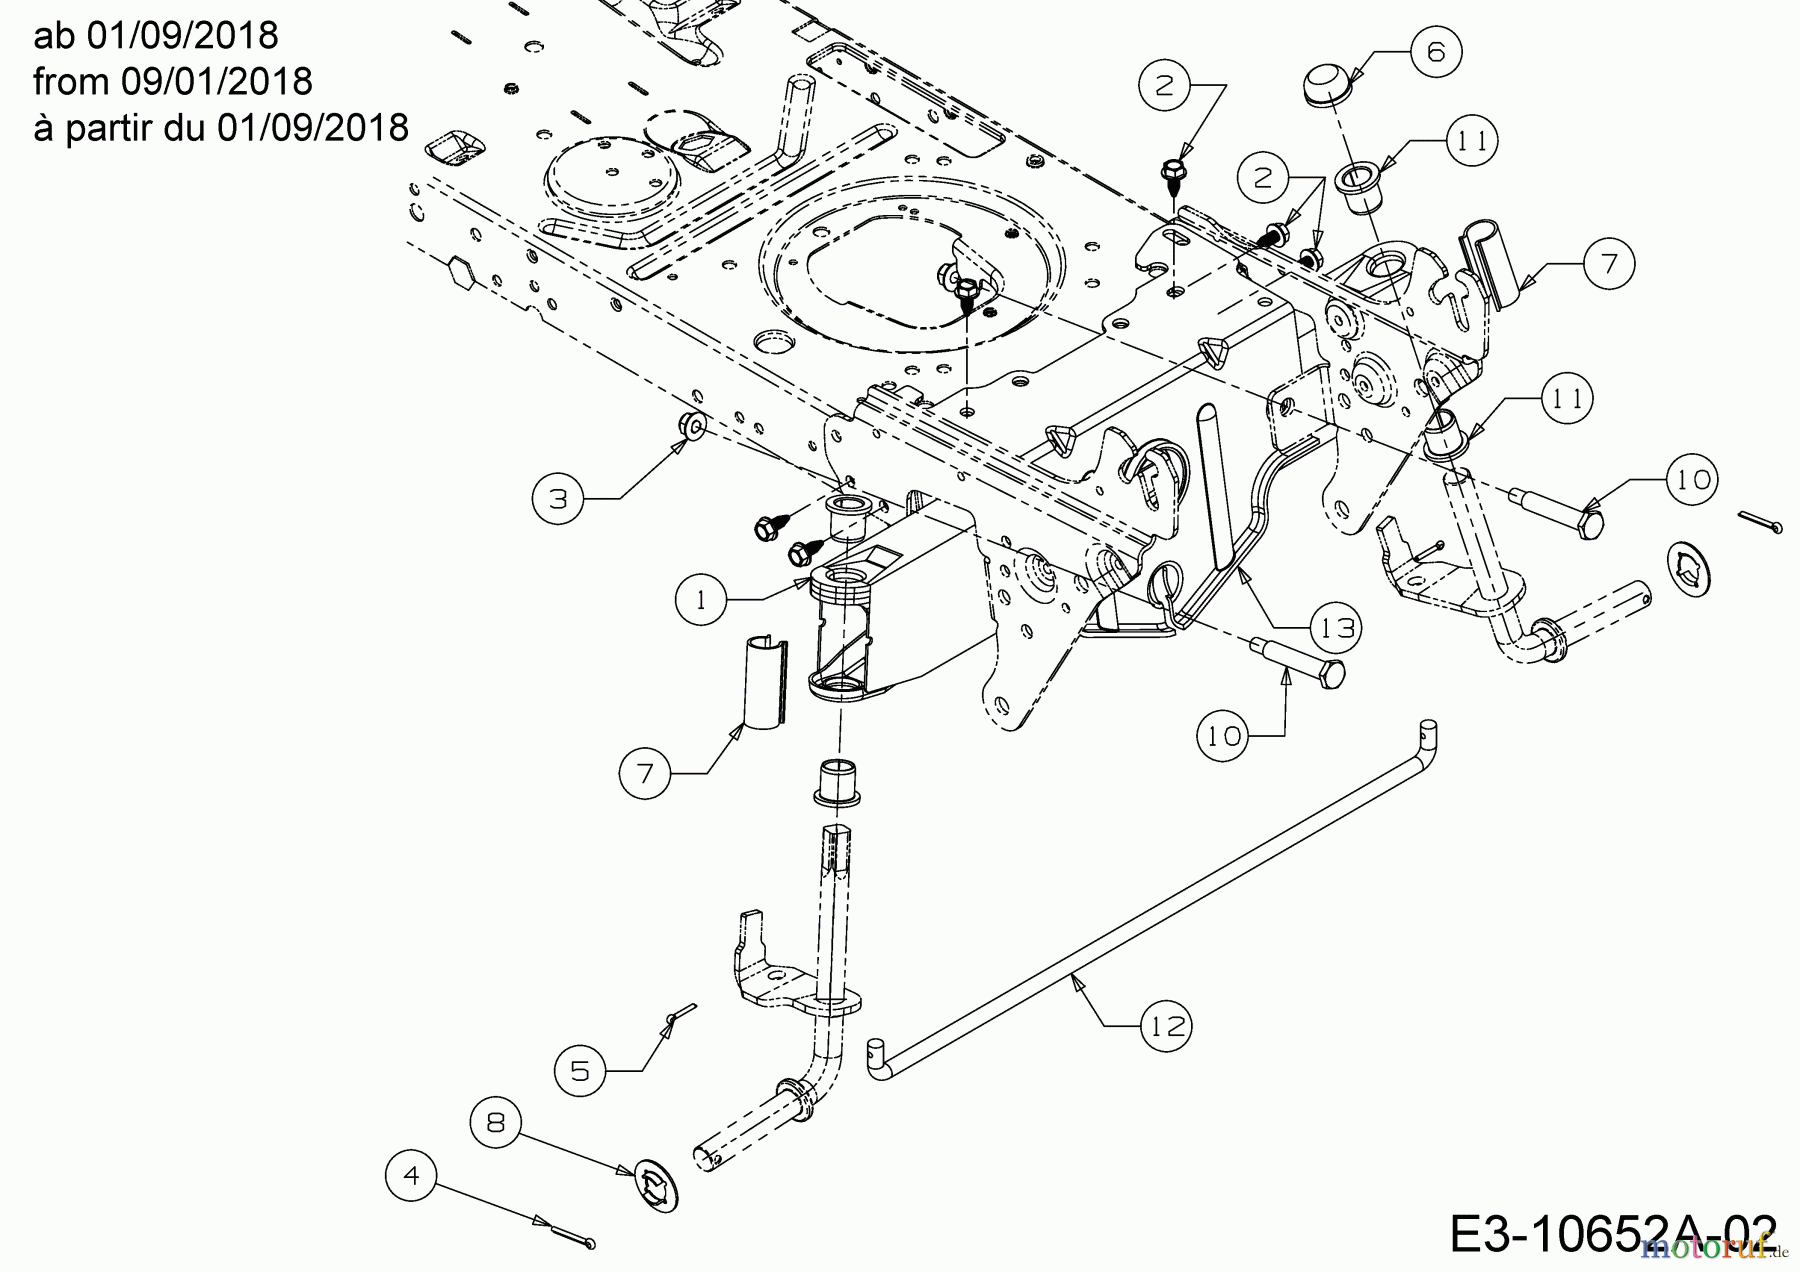  Wolf-Garten Lawn tractors E 13/96 H 13H2795F650  (2018) Front axle from 09/01/2018